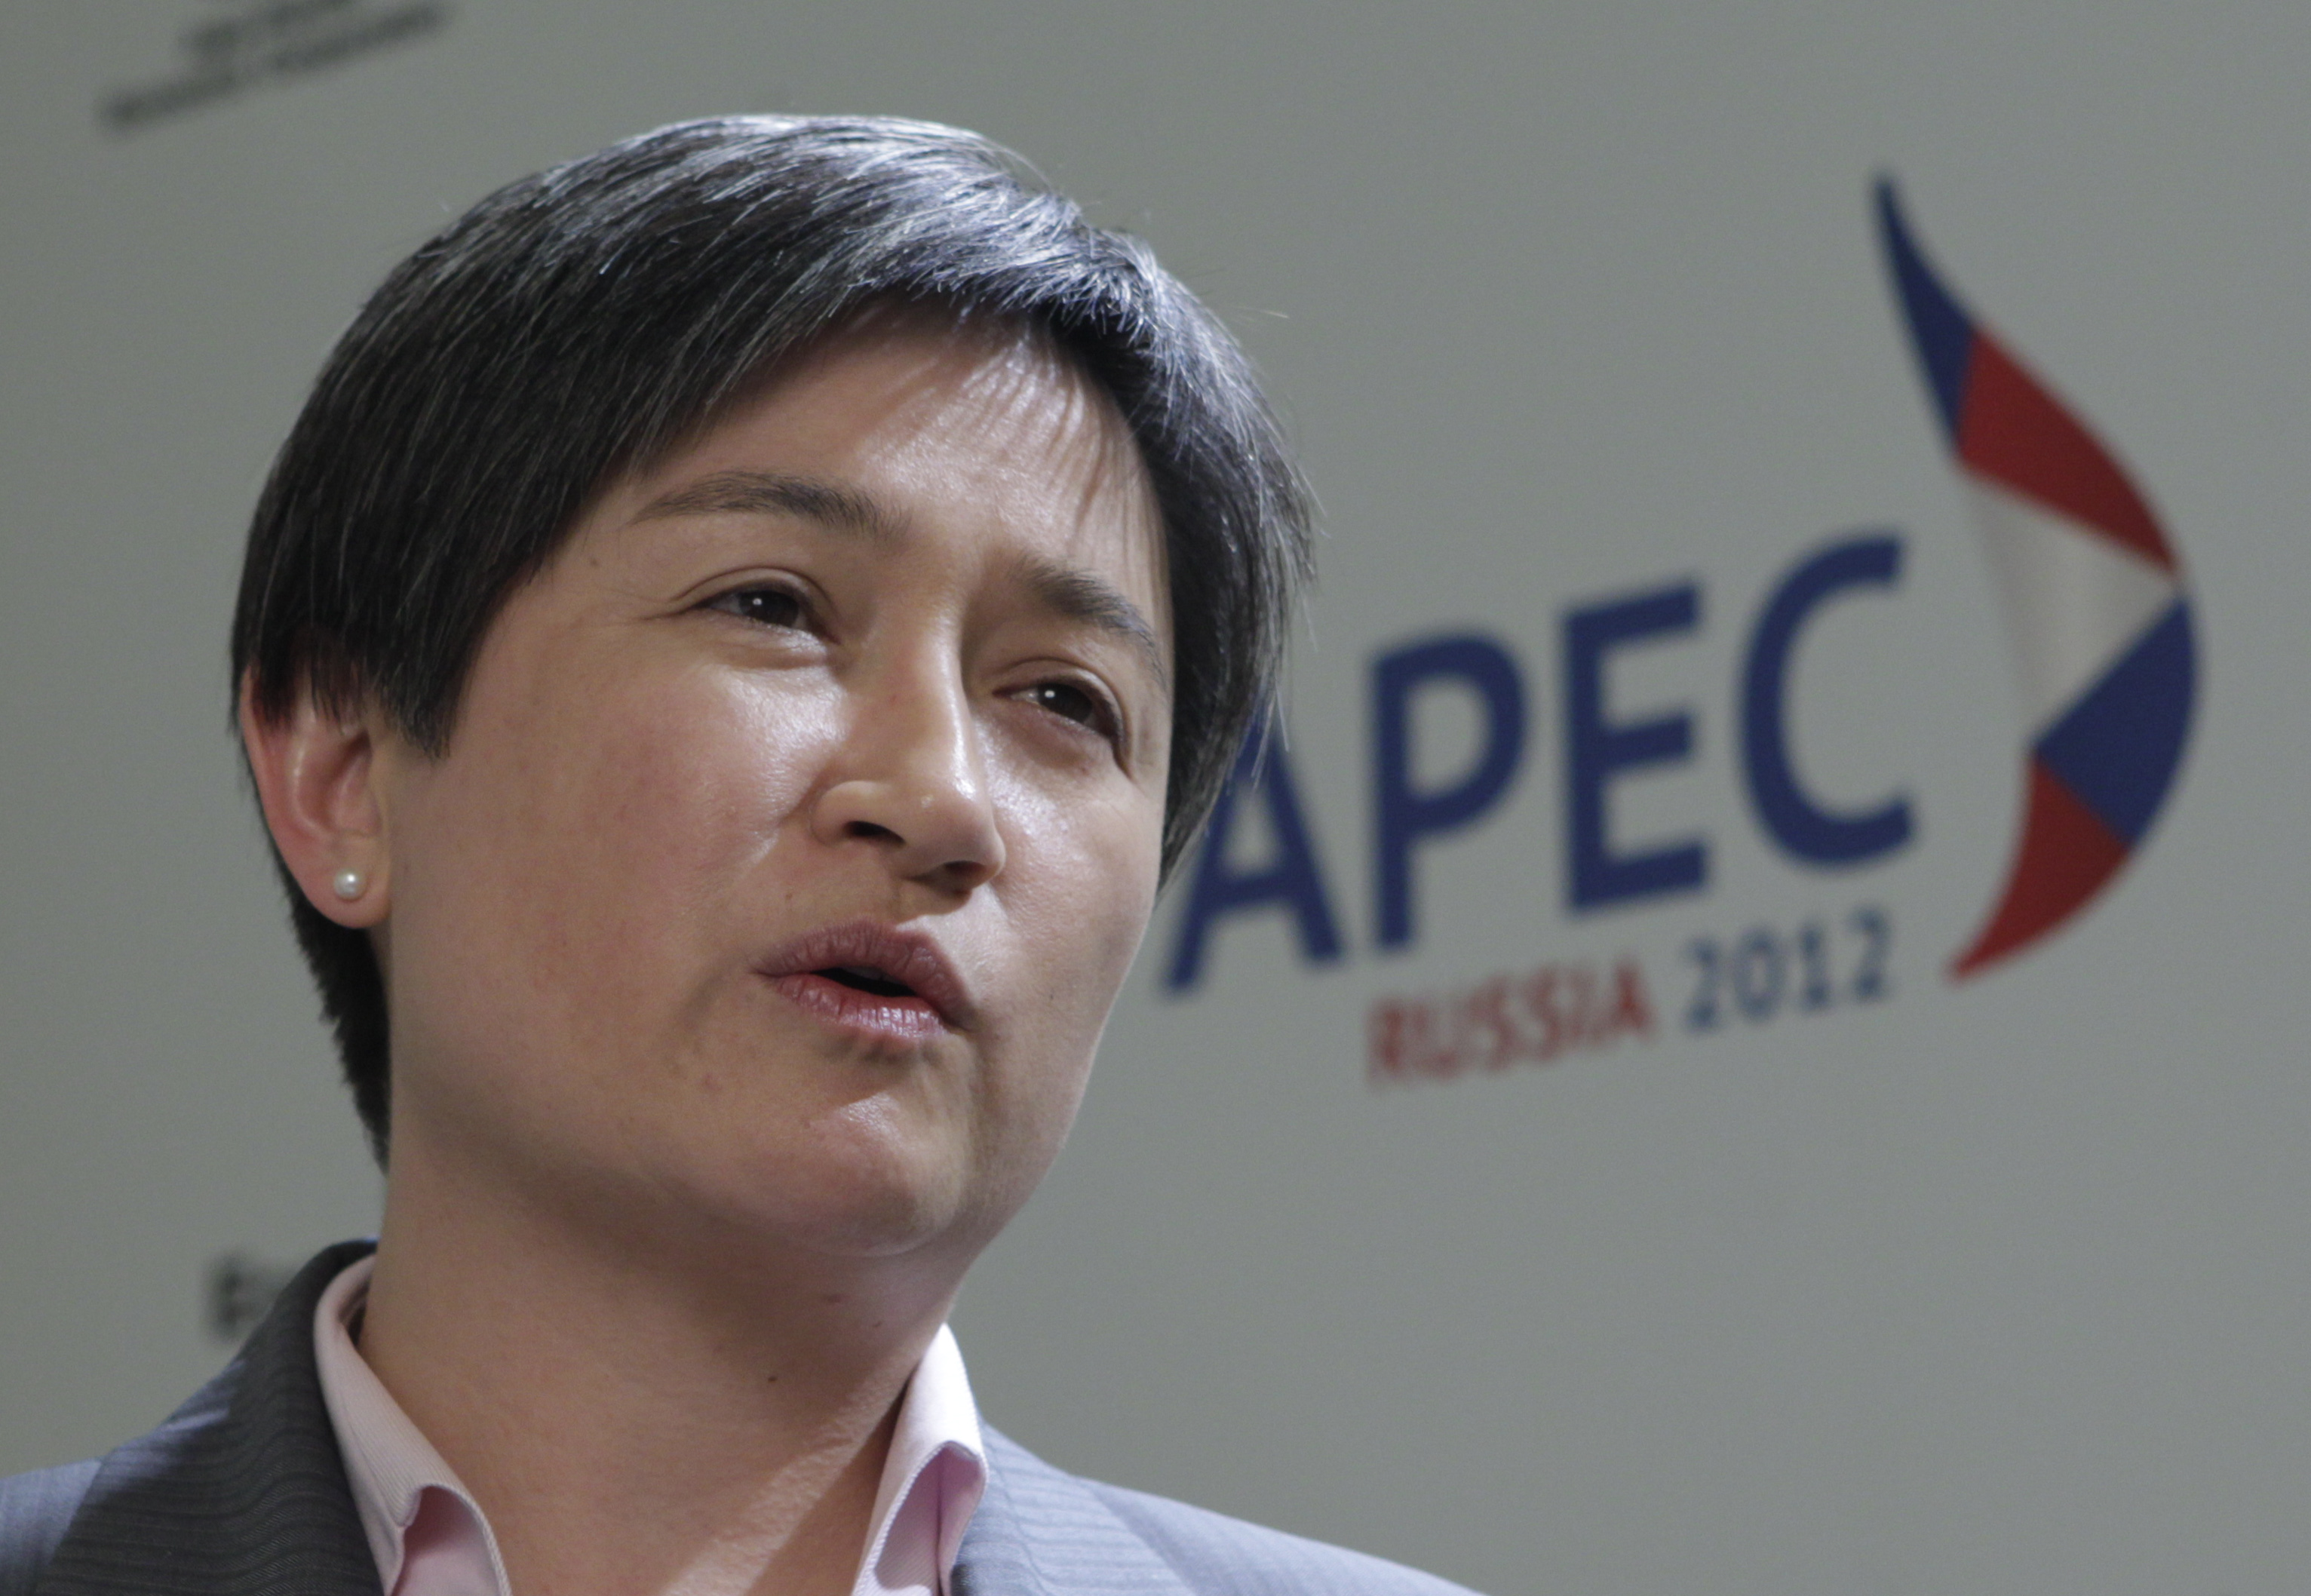 Australian Finance Minister Wong speaks during an interview after a meeting between Finance Ministers of the Asia-Pacific Economic Cooperation (APEC) in Moscow